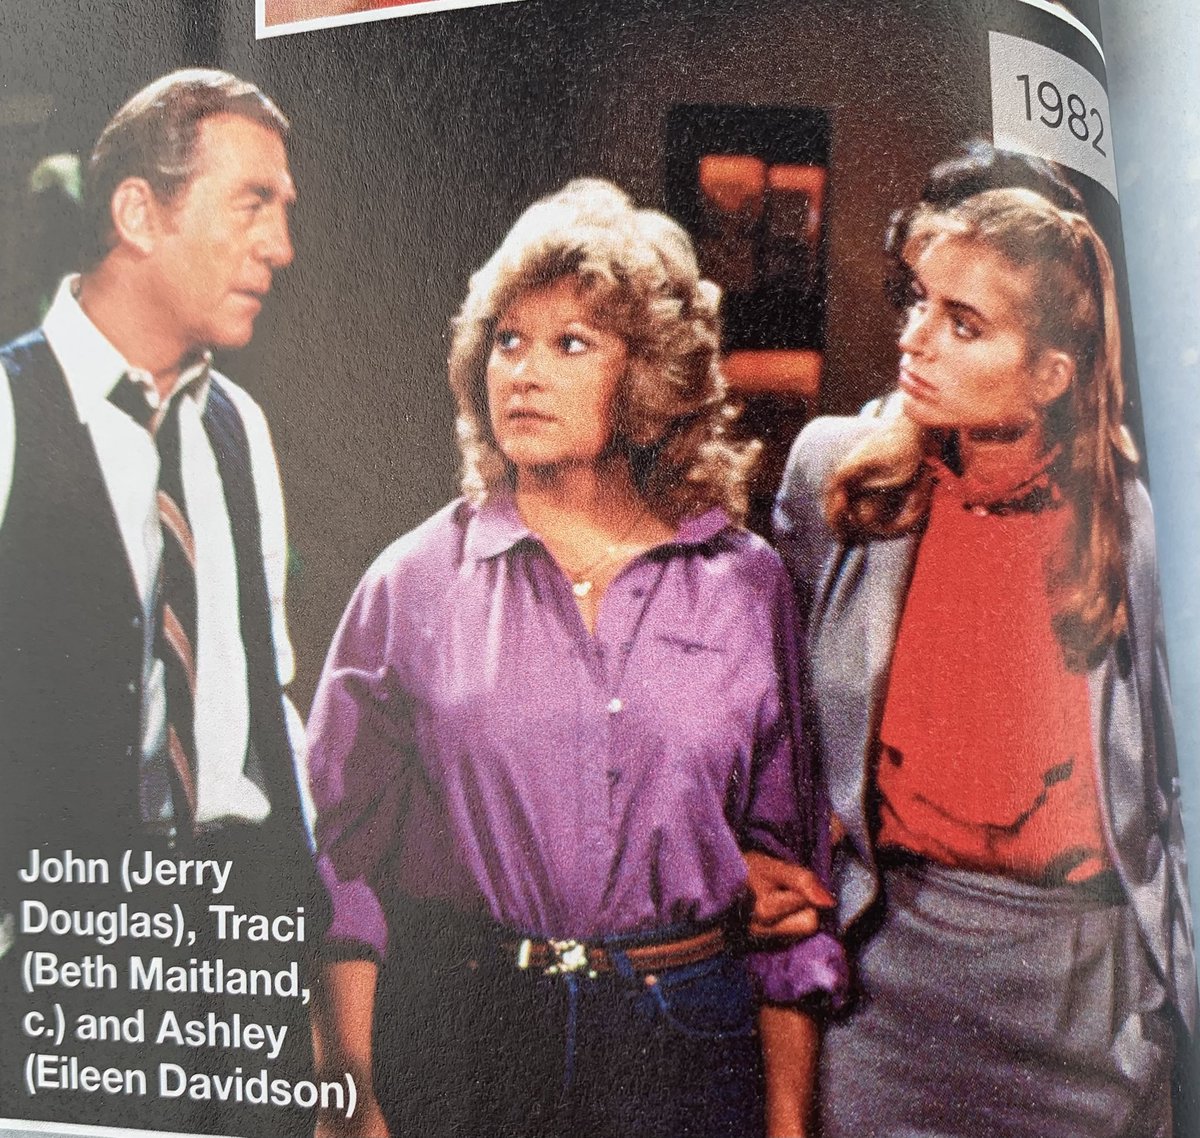 The #AbbottSisters @BethMaitlandDQB and @eileen_davidson with their tv dad #JerryDouglas (May he Rest In Peace). Beth & Eileen have gotten more beautiful as time passed. Happy #MaitlandMondayYR friends! #YR #TeamTraci #TraciAbbott #AshleyAbbott